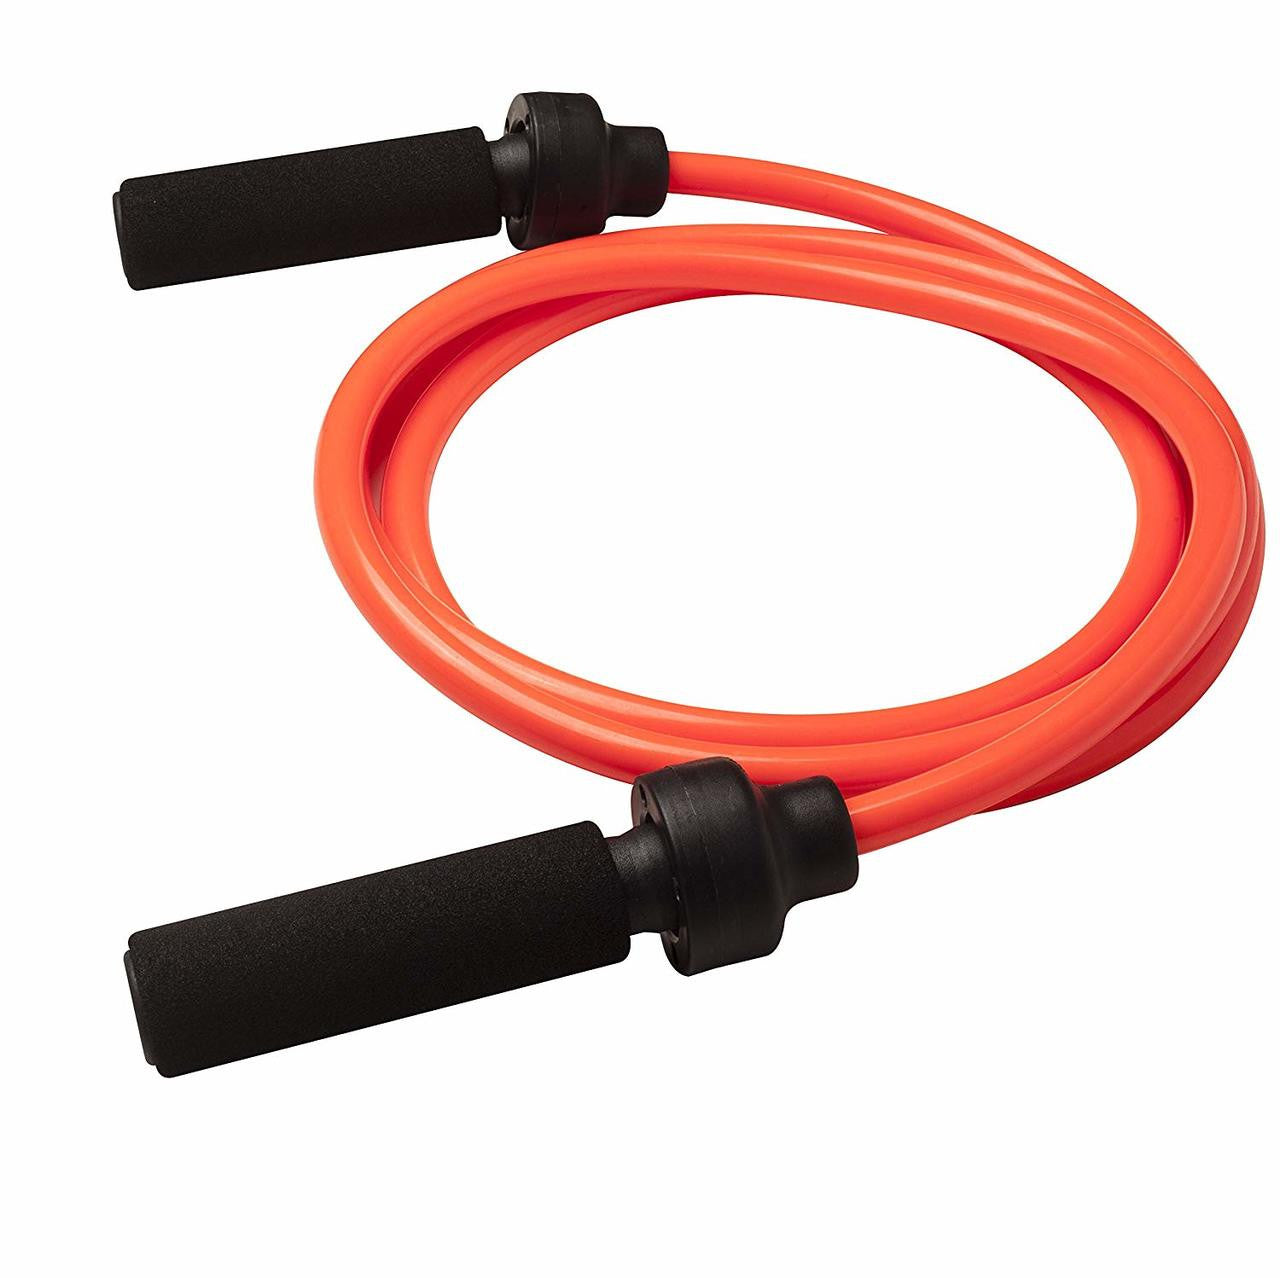 2 lb weighted jump rope